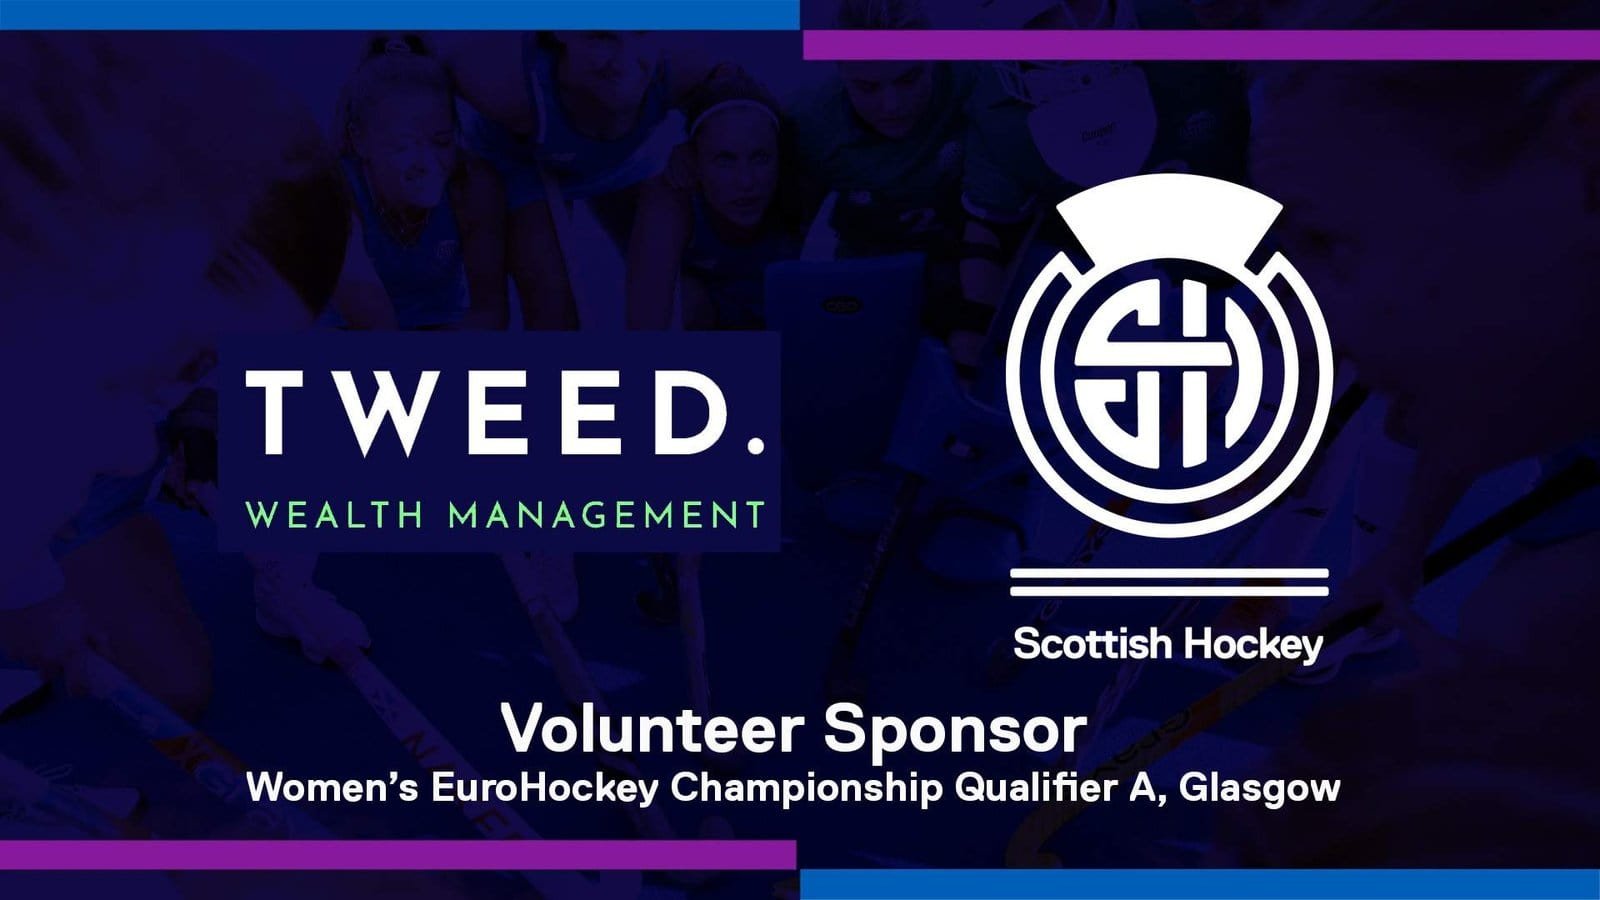 scotland tweed wealth management sponsor volunteers at eurohockey qualifiers 66a49962d4a98 - Great Britain - Great britain